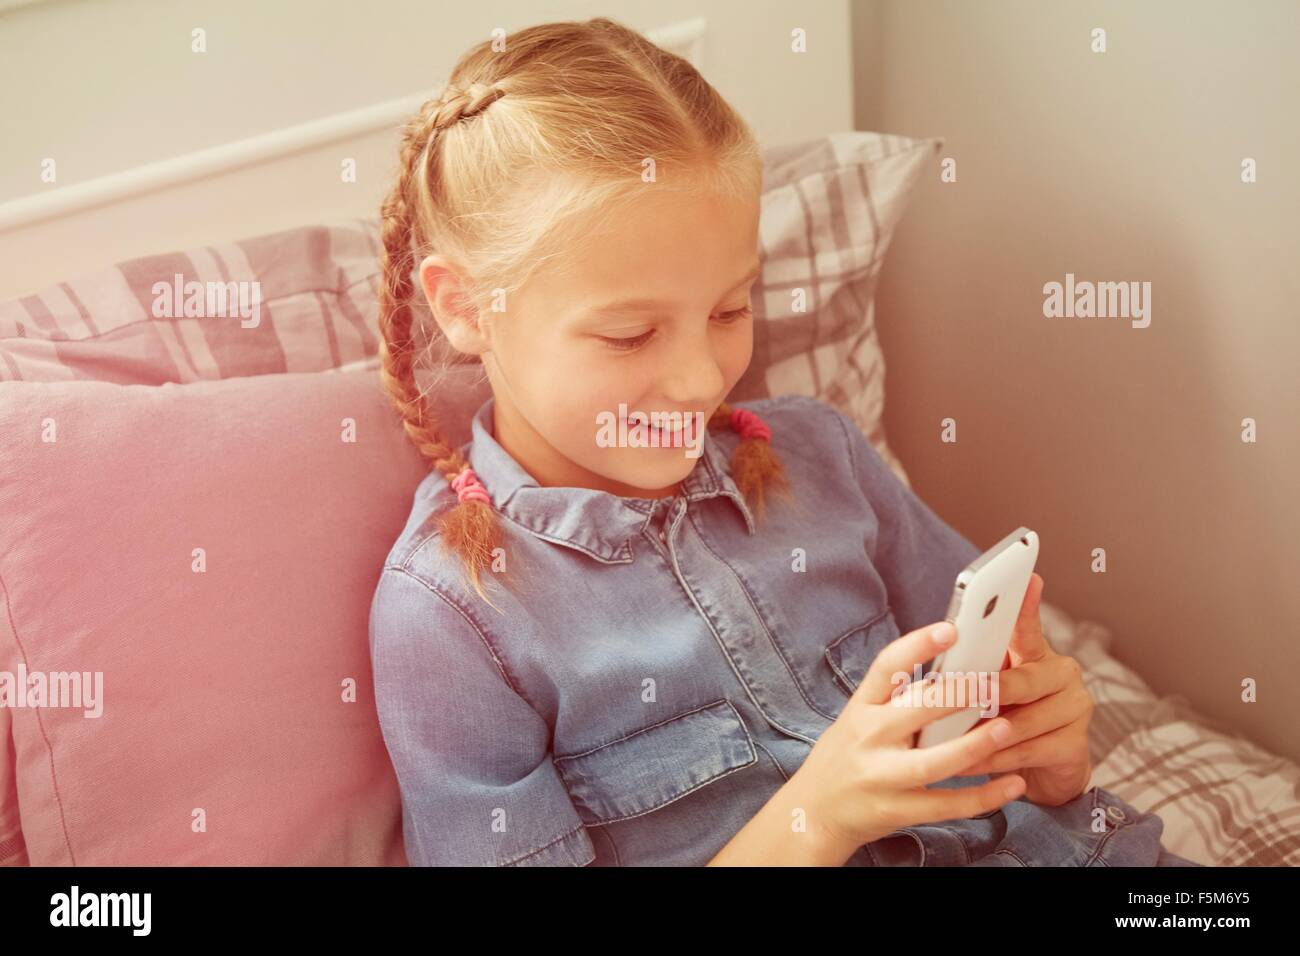 High angle view of girl sitting on bed looking down at smartphone smiling Stock Photo